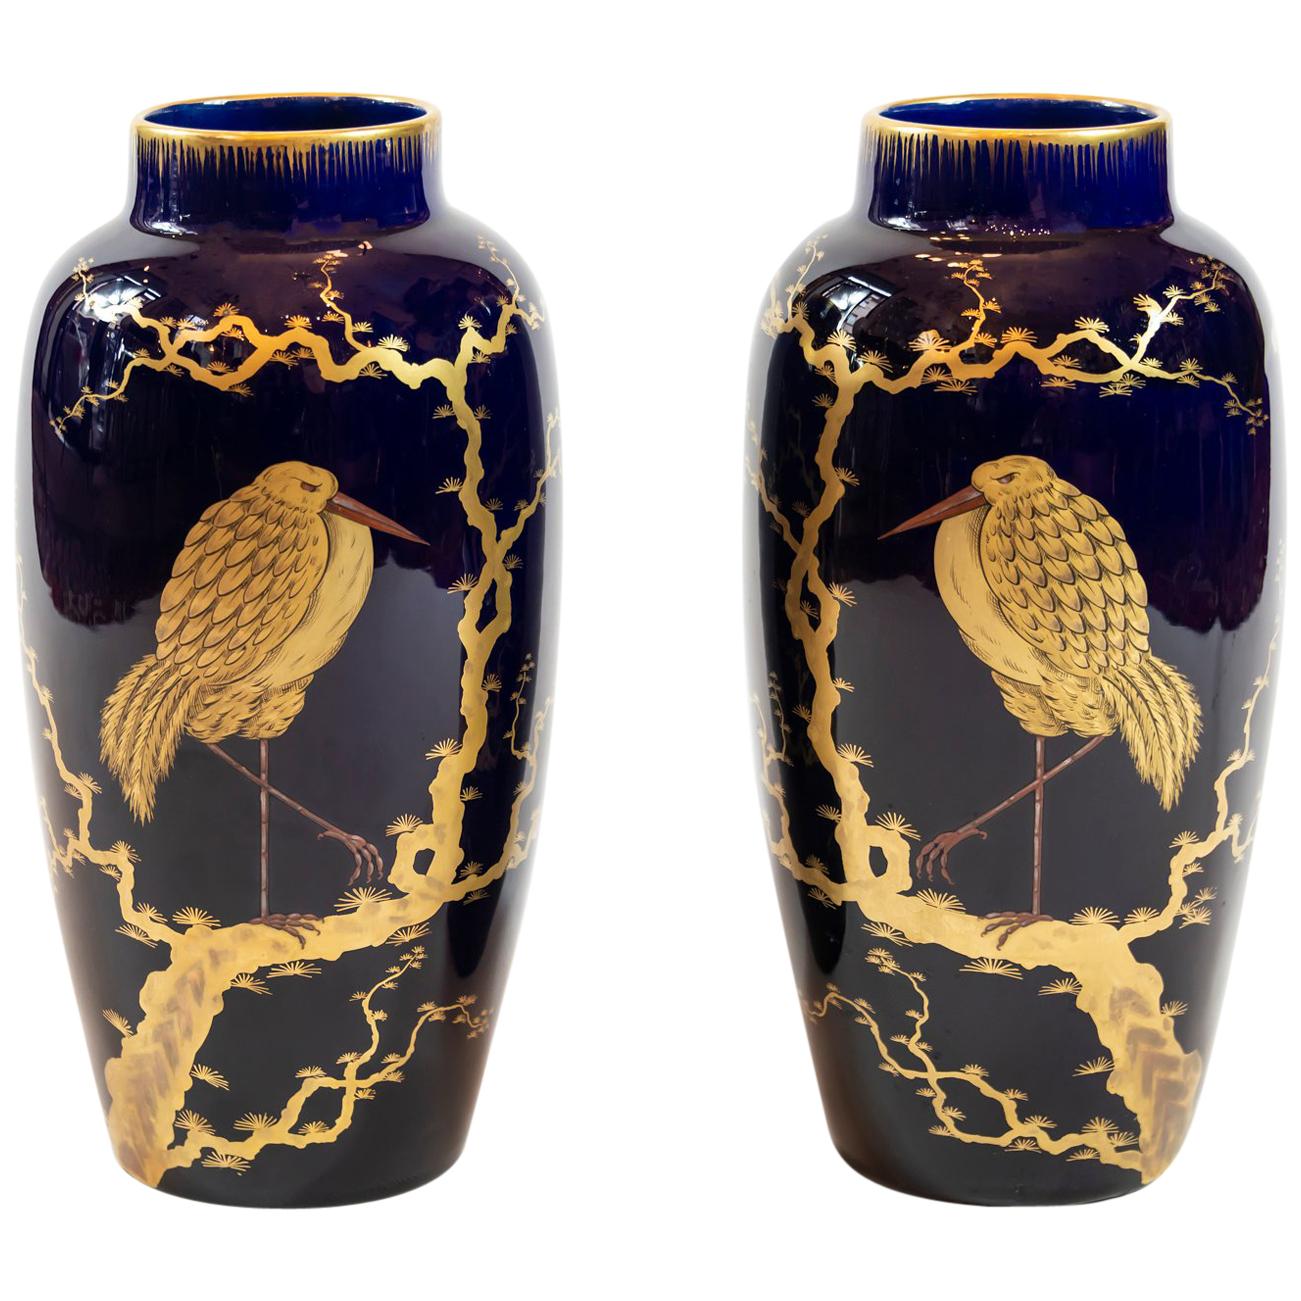 Pair of French Porcelain Cobalt Blue Vases with Birds